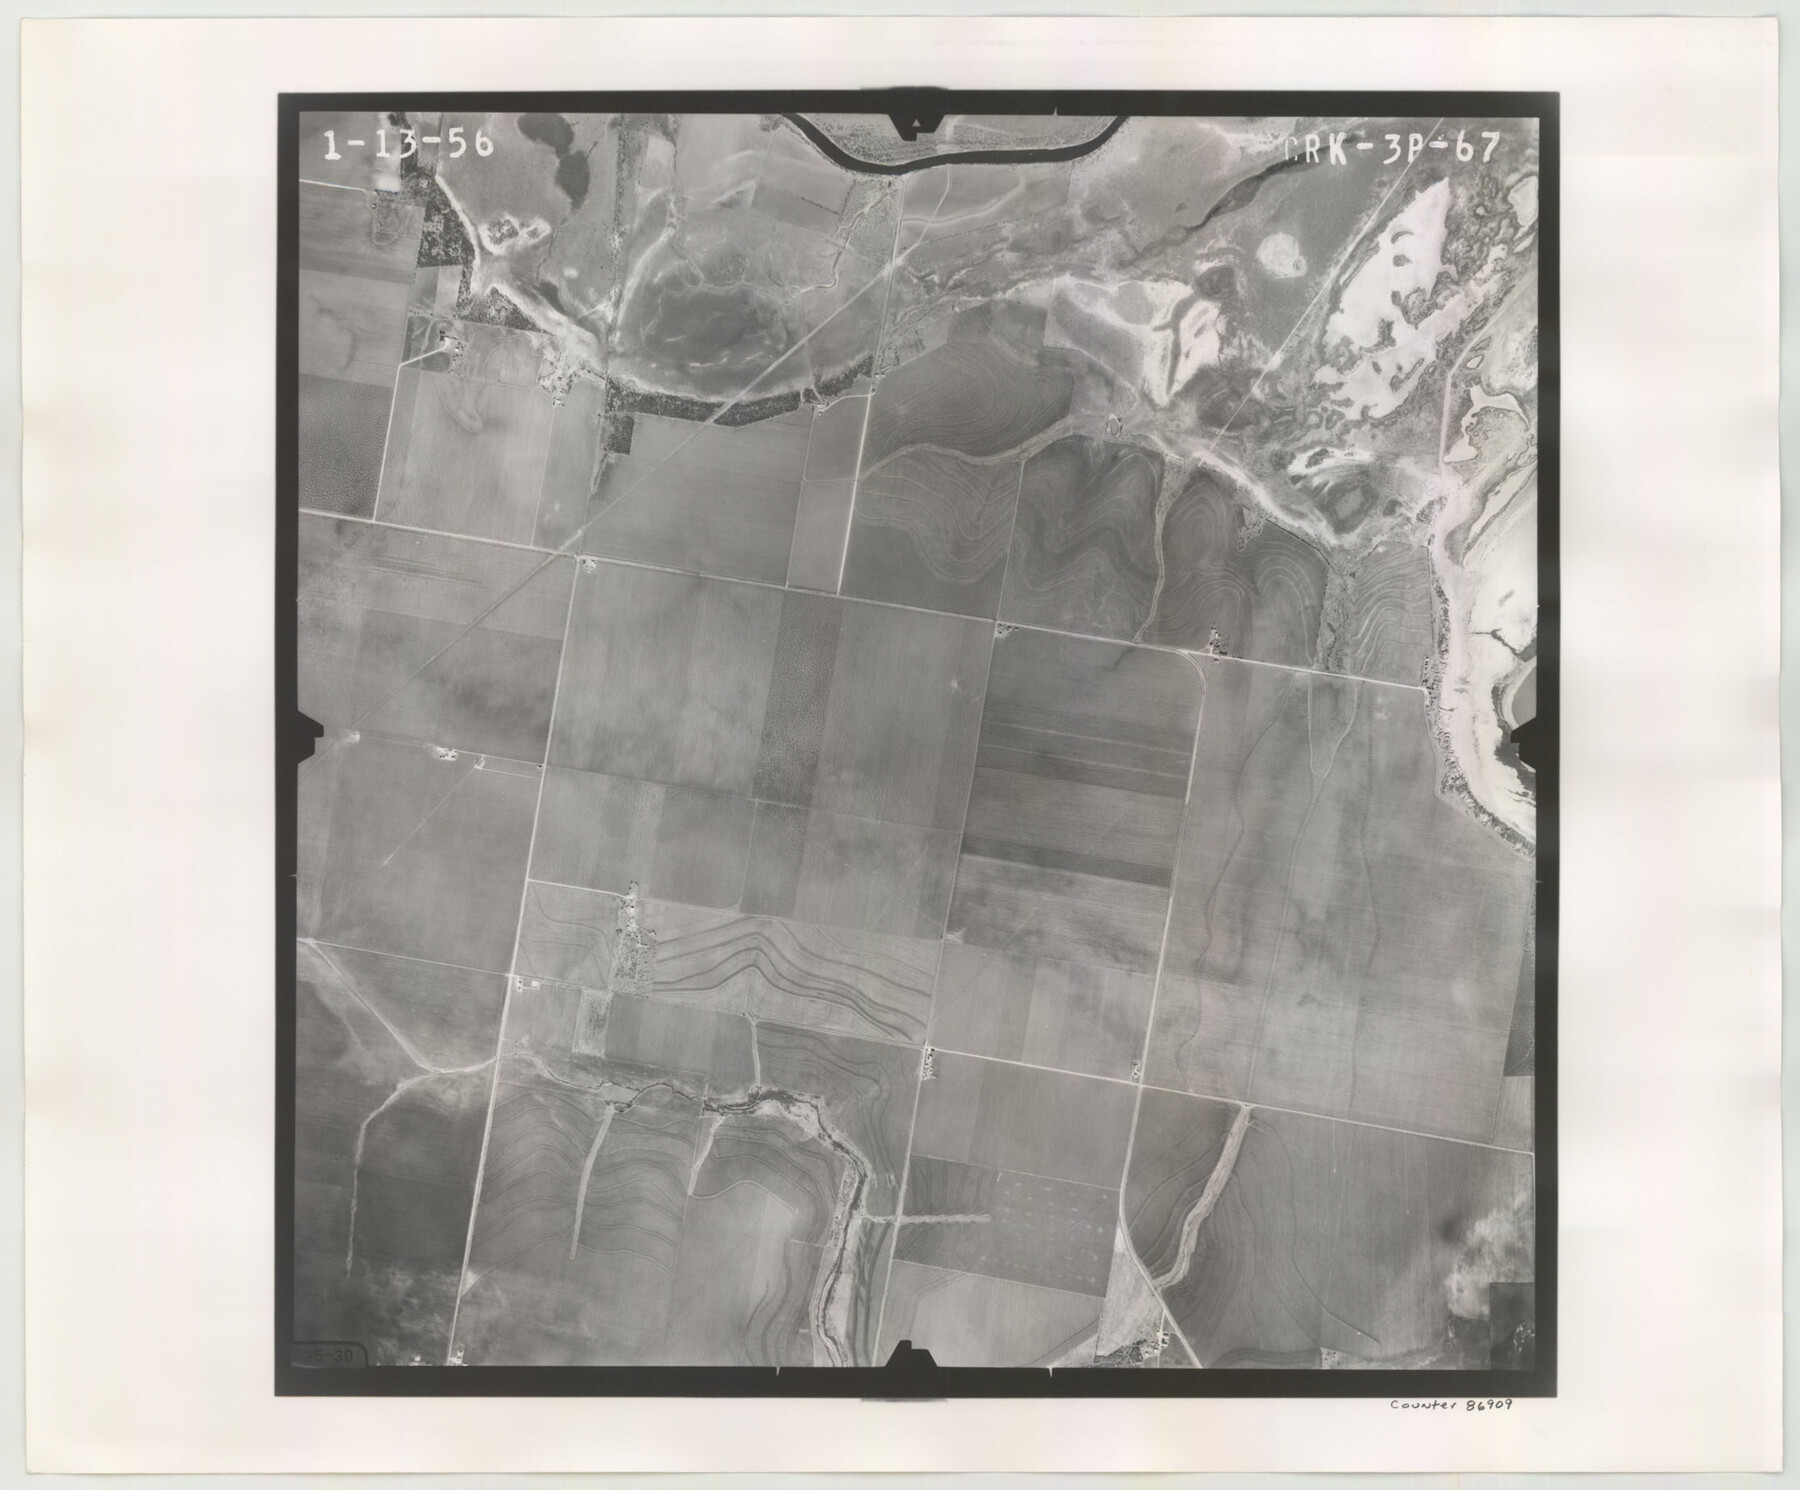 86909, Flight Mission No. CRK-3P, Frame 67, Refugio County, General Map Collection